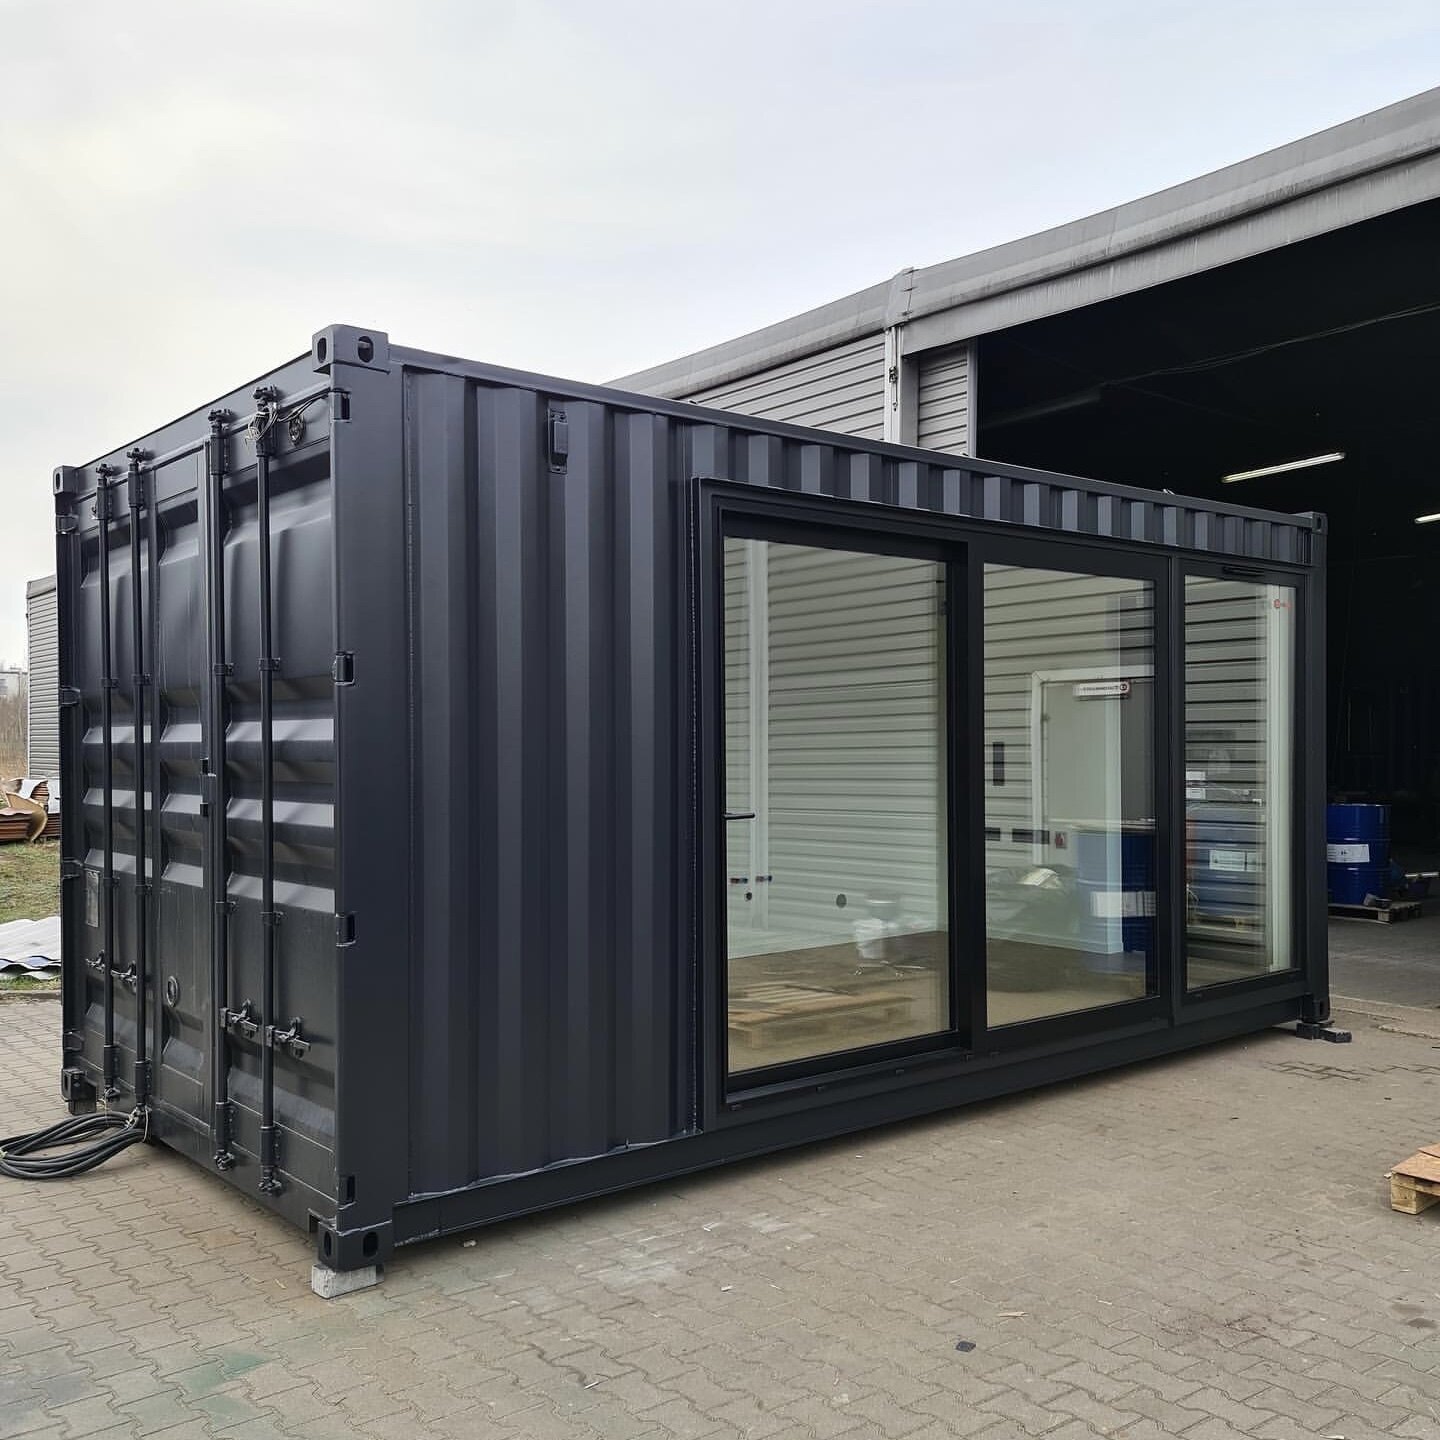 The advantage of choosing to build shipping container homes